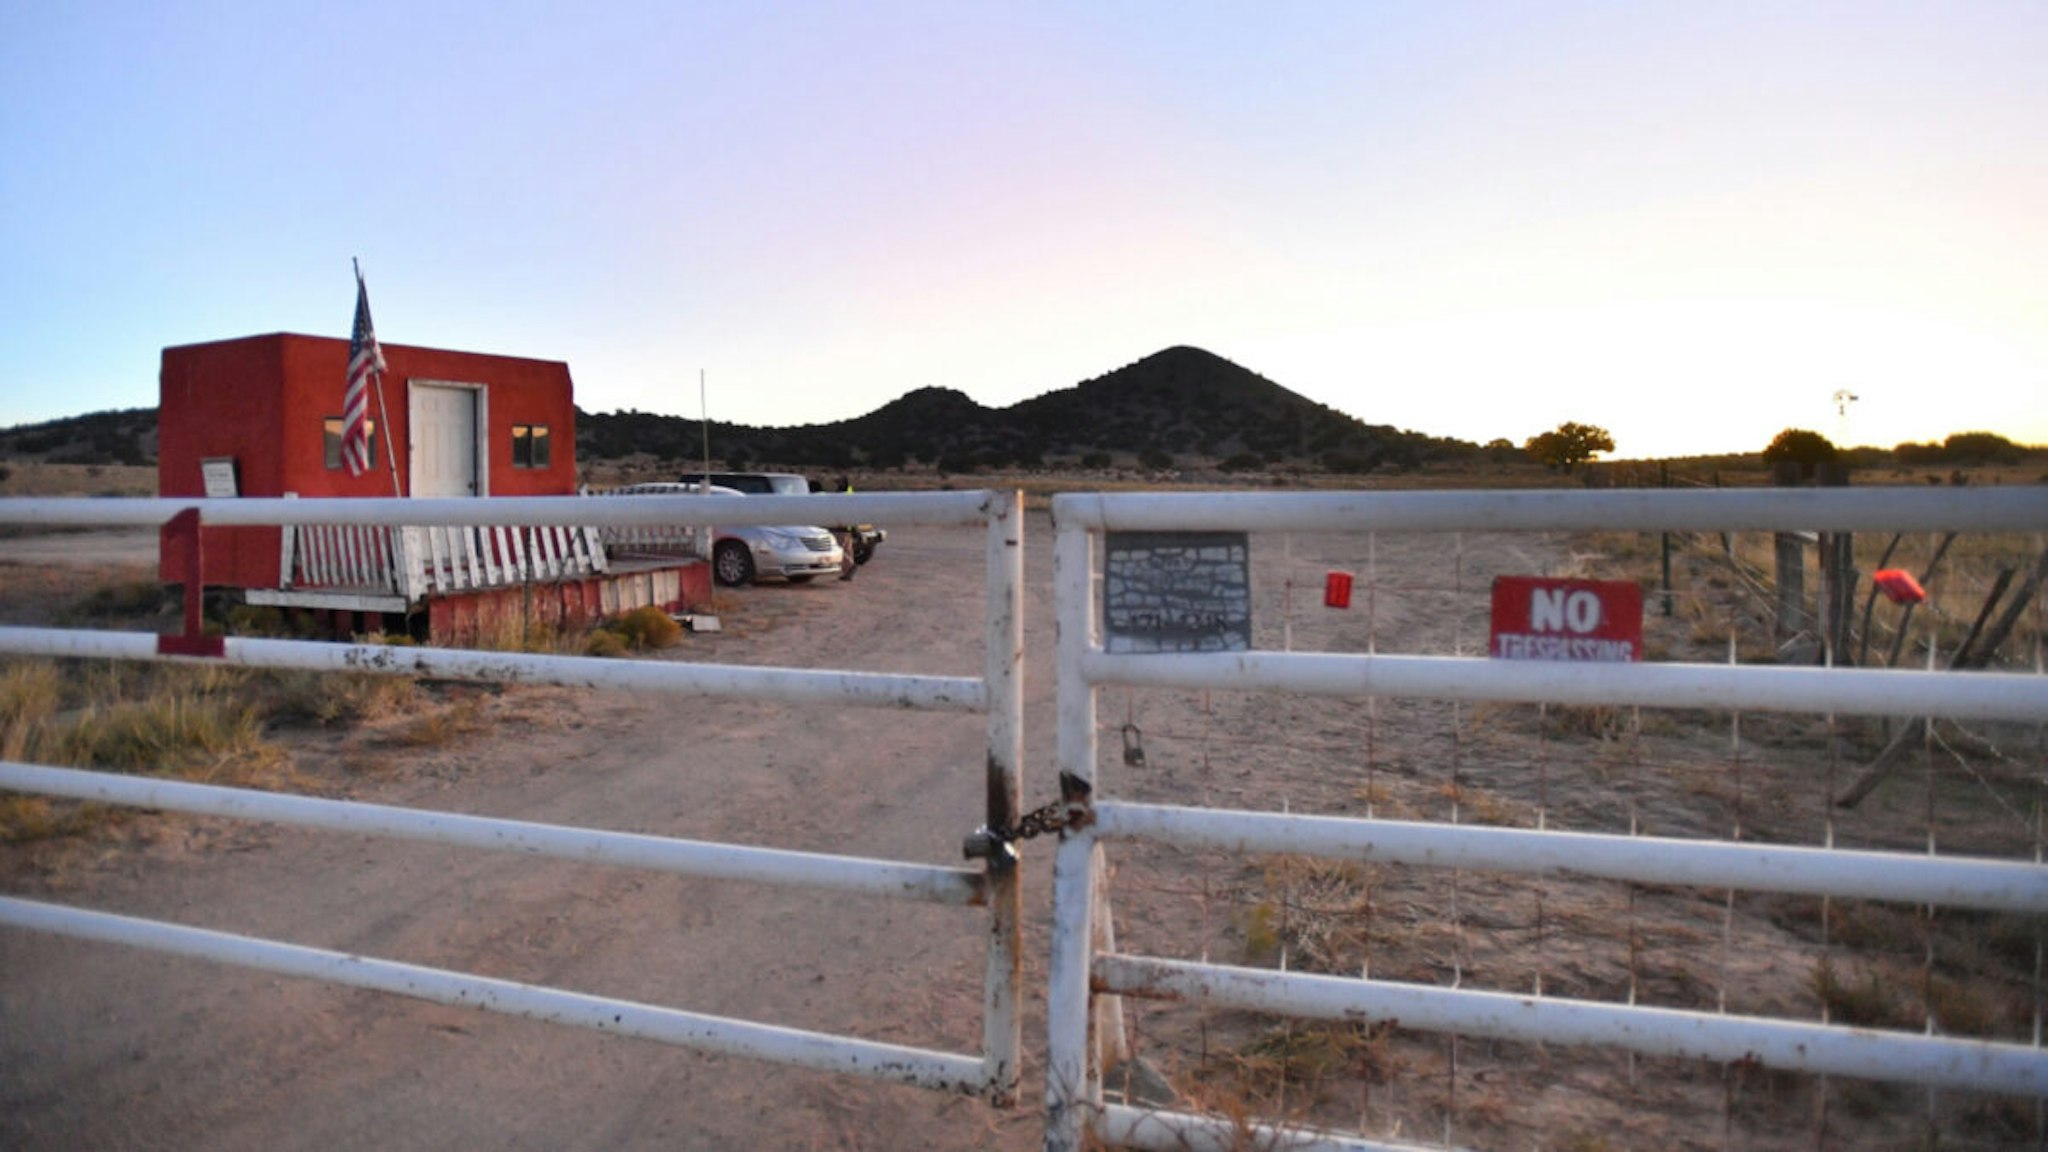 A general view shows a locked gate at the entrance to the Bonanza Creek Ranch on October 22, 2021 in Santa Fe, New Mexico.